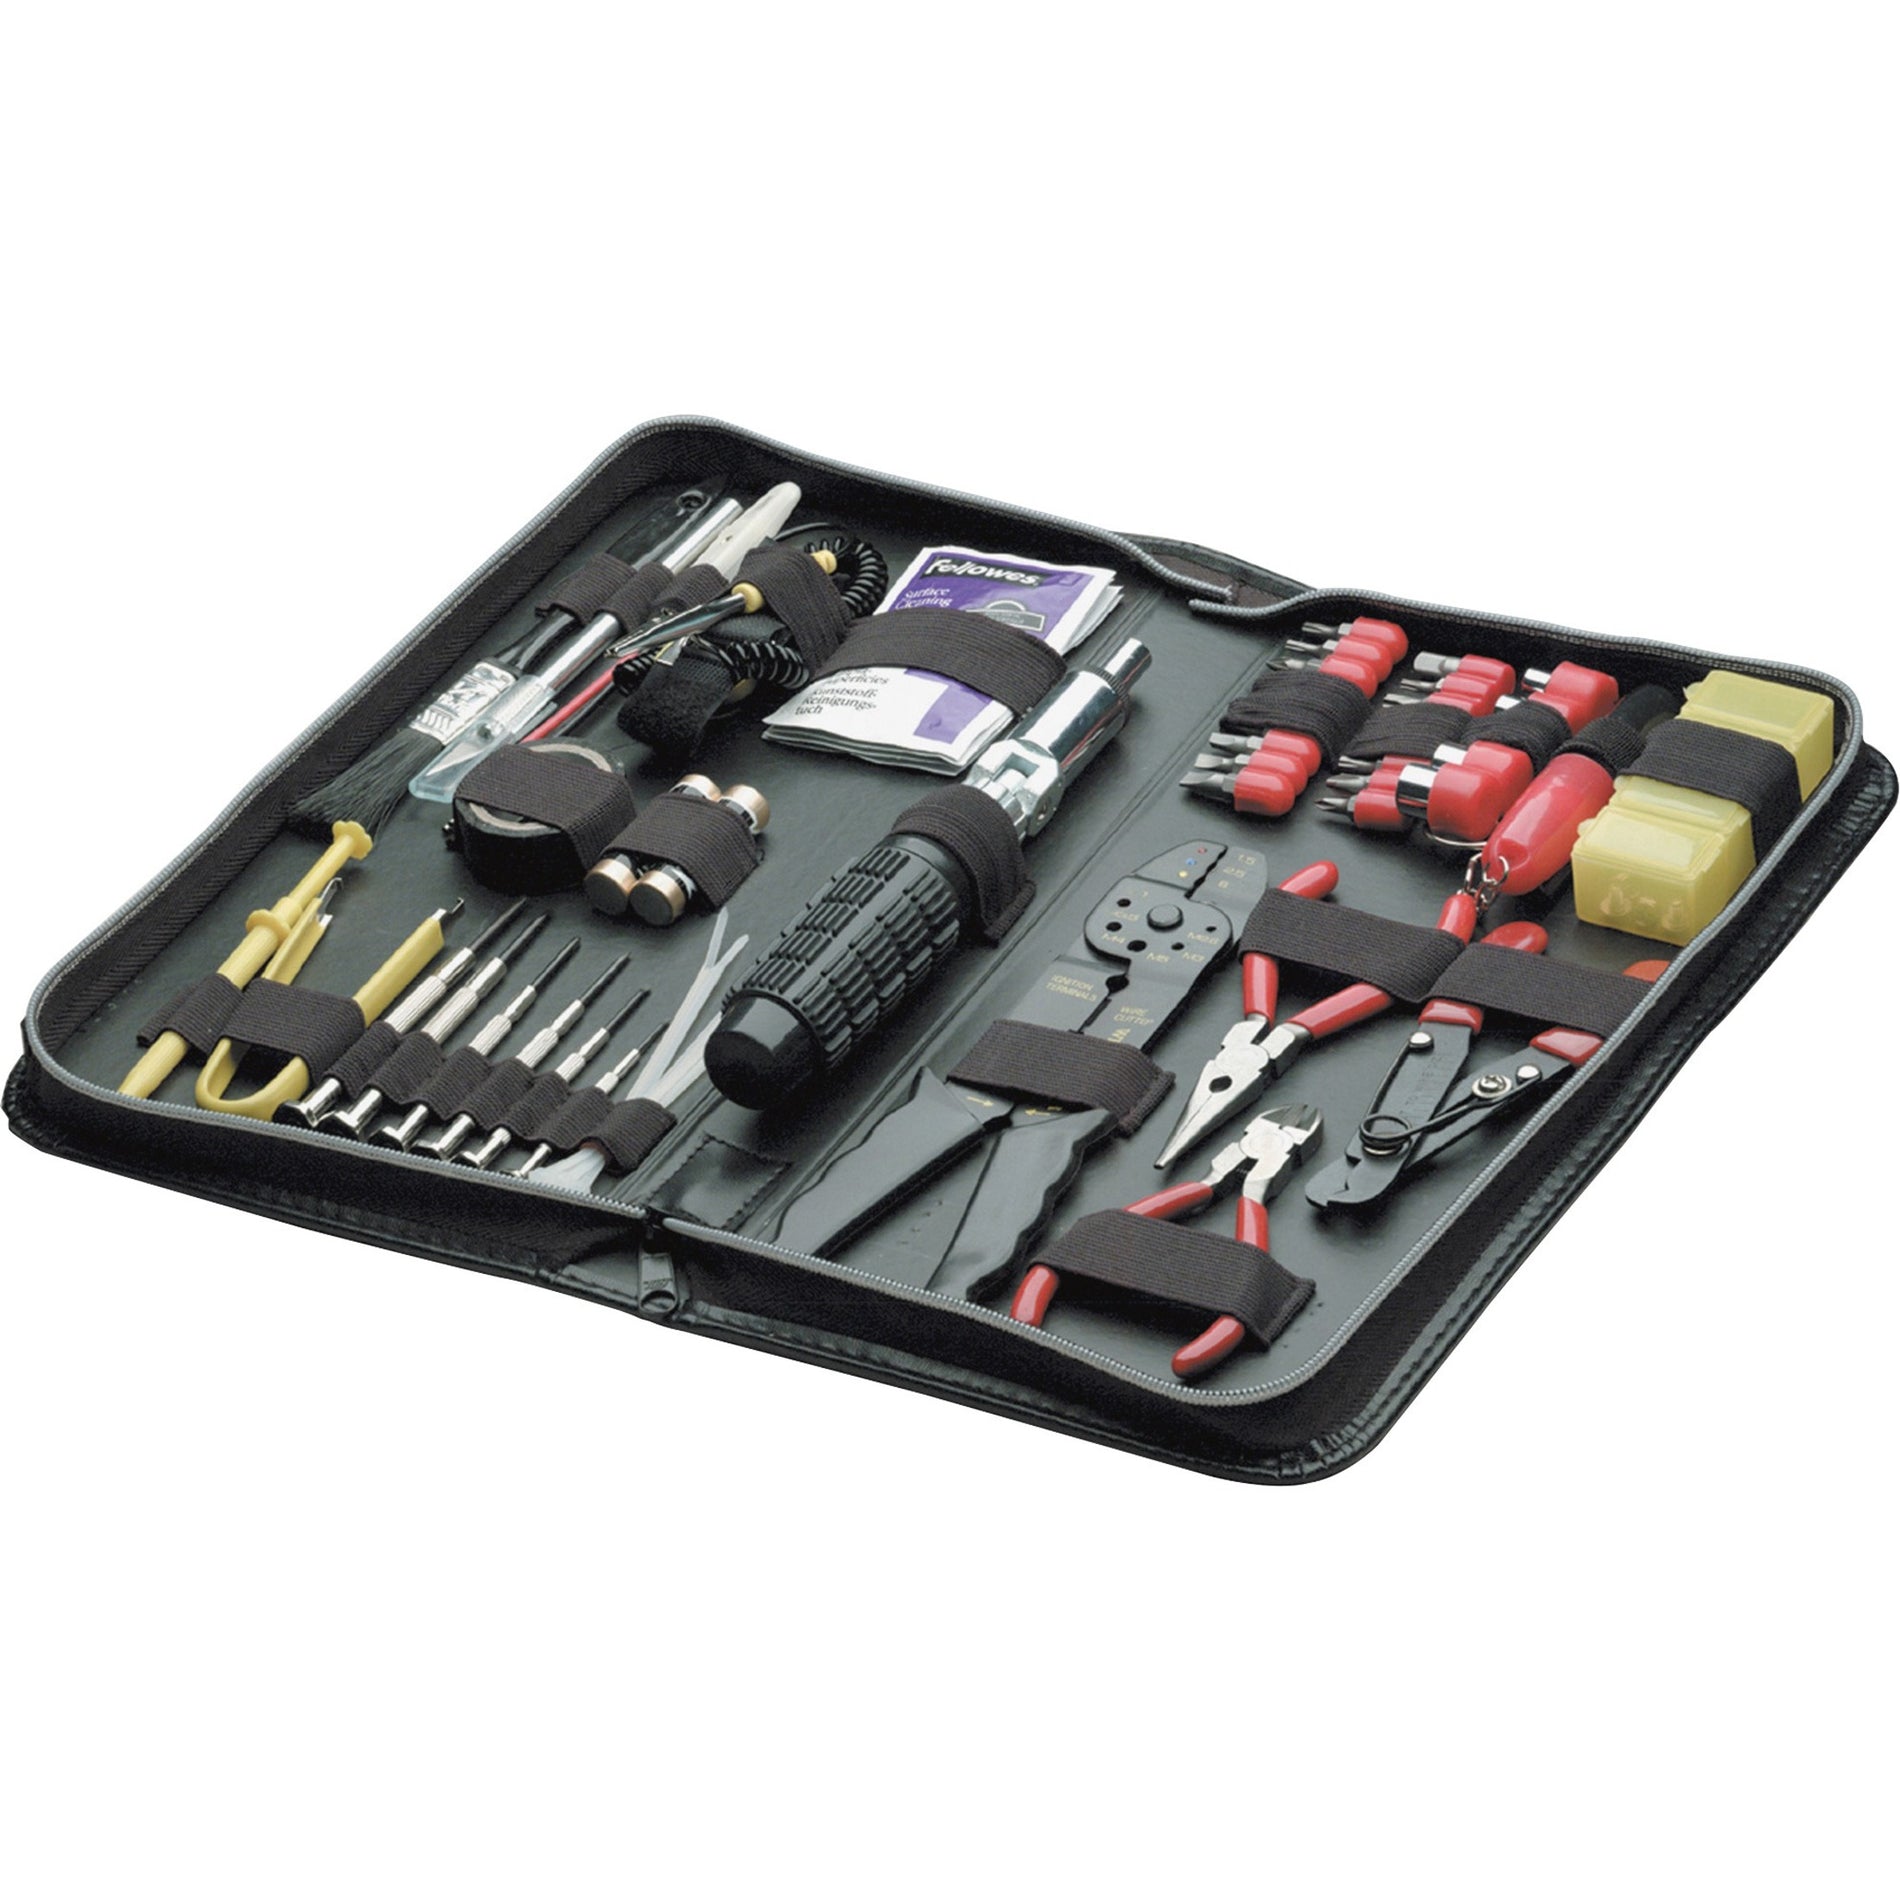 Fellowes 49106 Premium Computer Tool Kit-55 Piece, Complete DIY Repair and Maintenance Solution